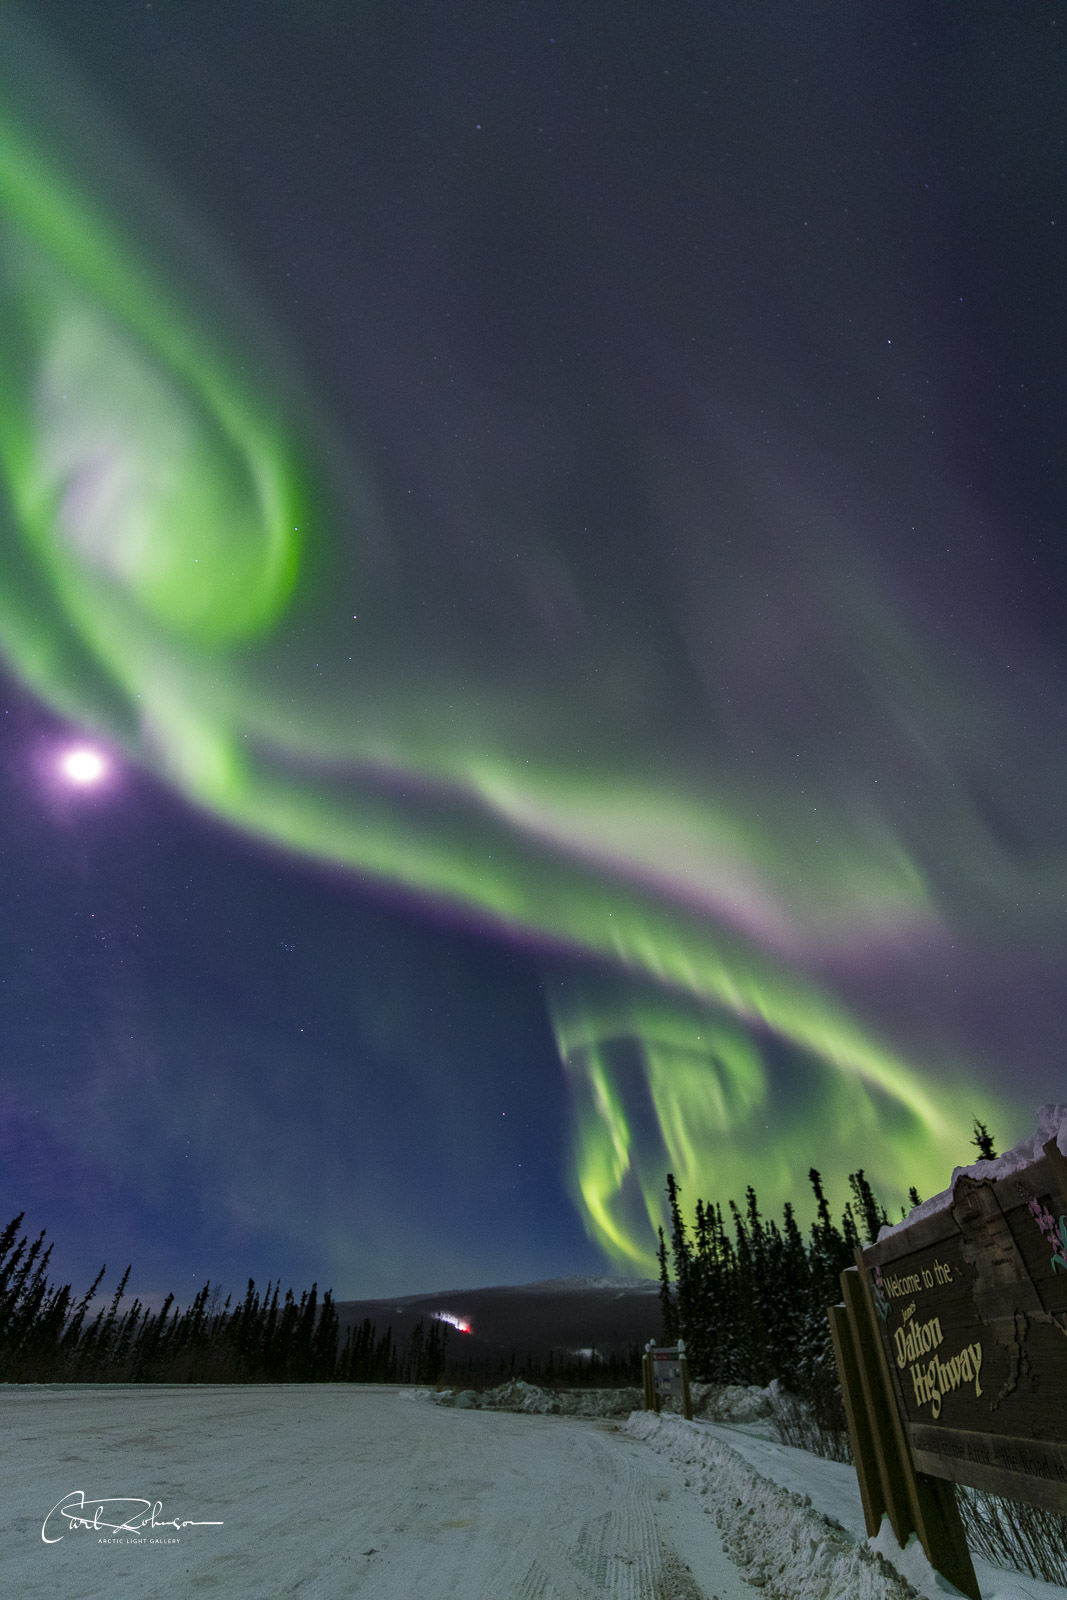 A series of aurora borealis displays that look like rising spires tower over the Dalton Highway sign.